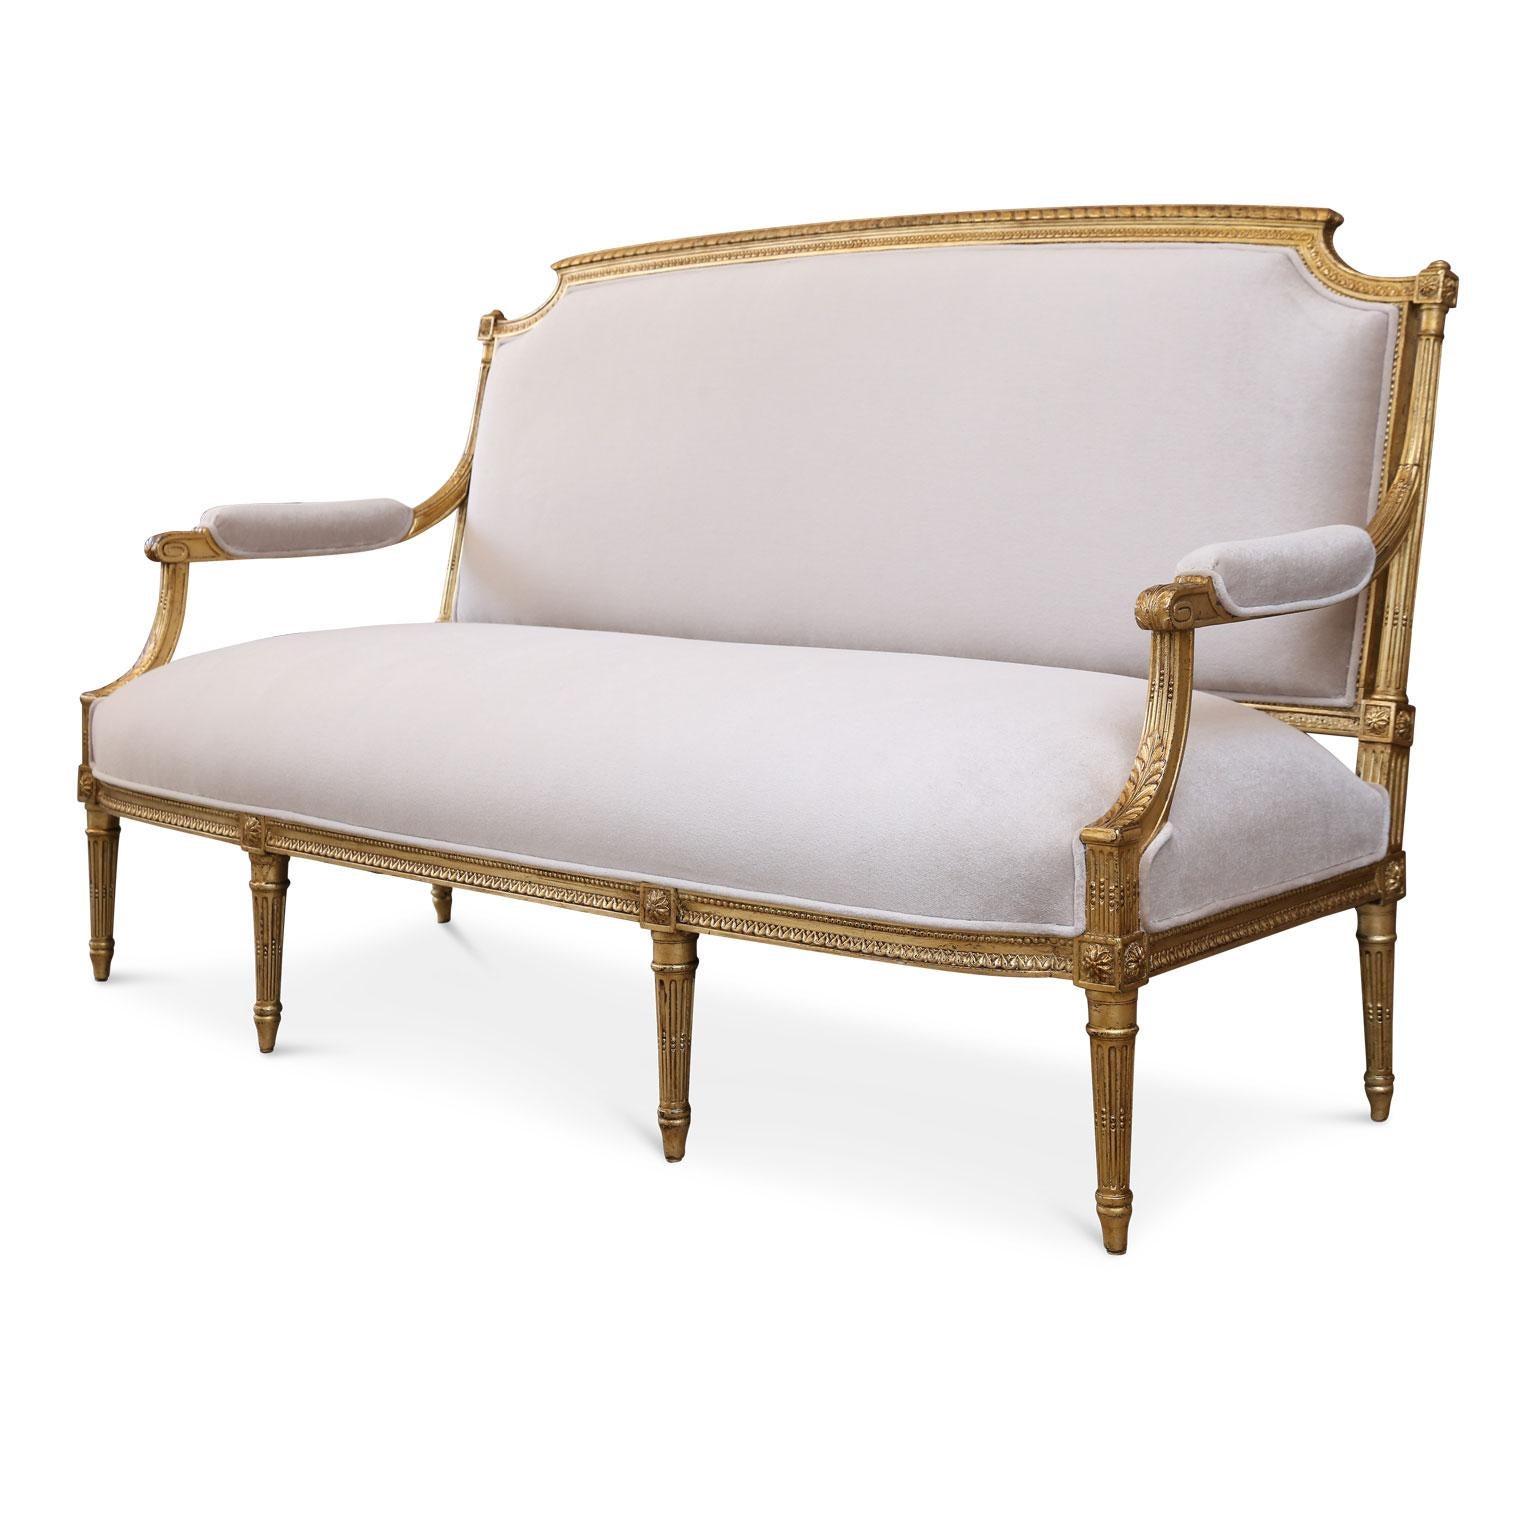 19th Century Gilded French Settee